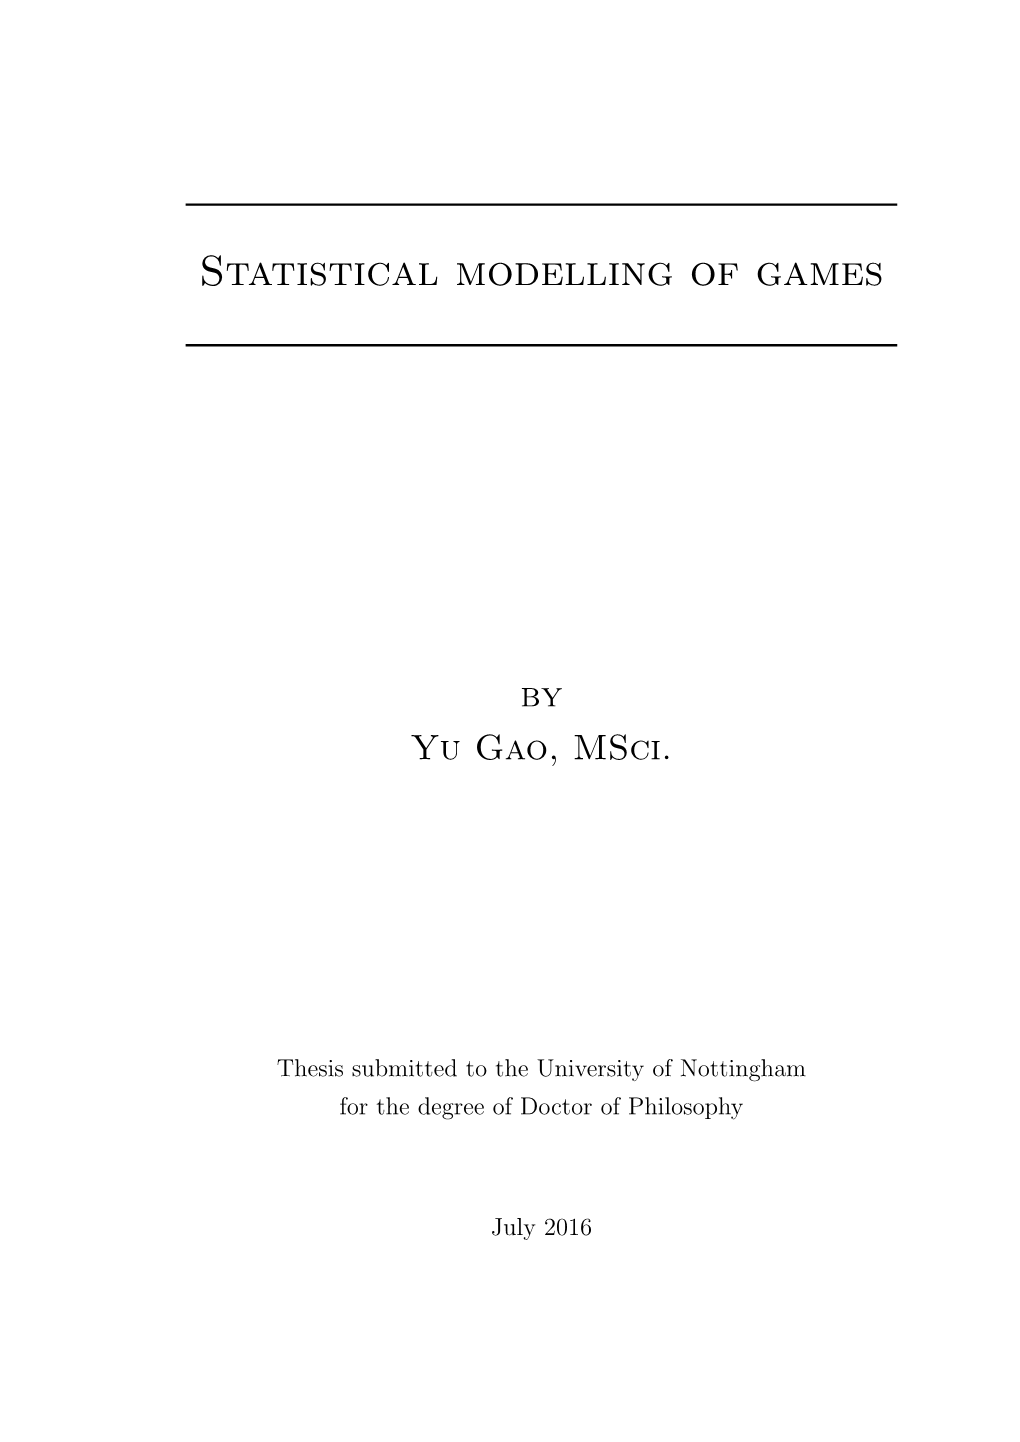 Statistical Modelling of Games